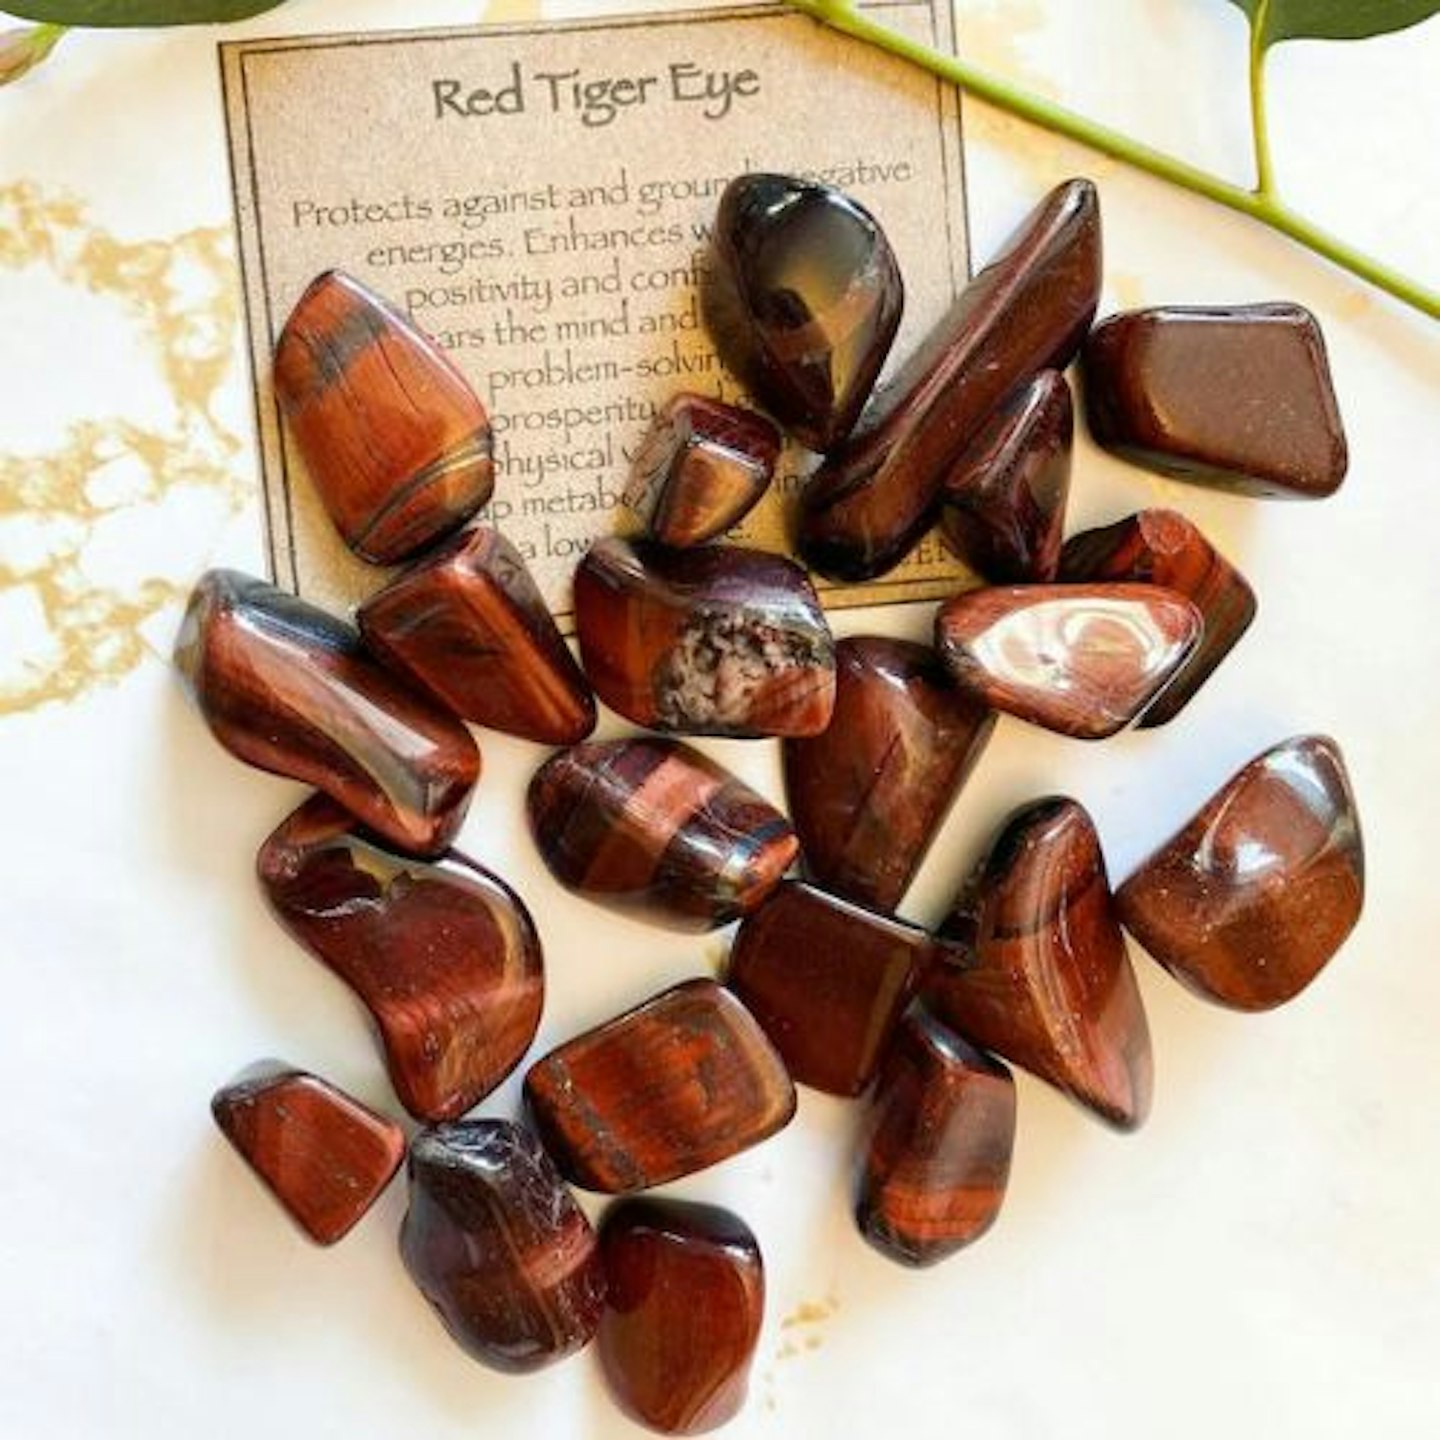 Red Tiger Eye Crystal Tumbled Stone